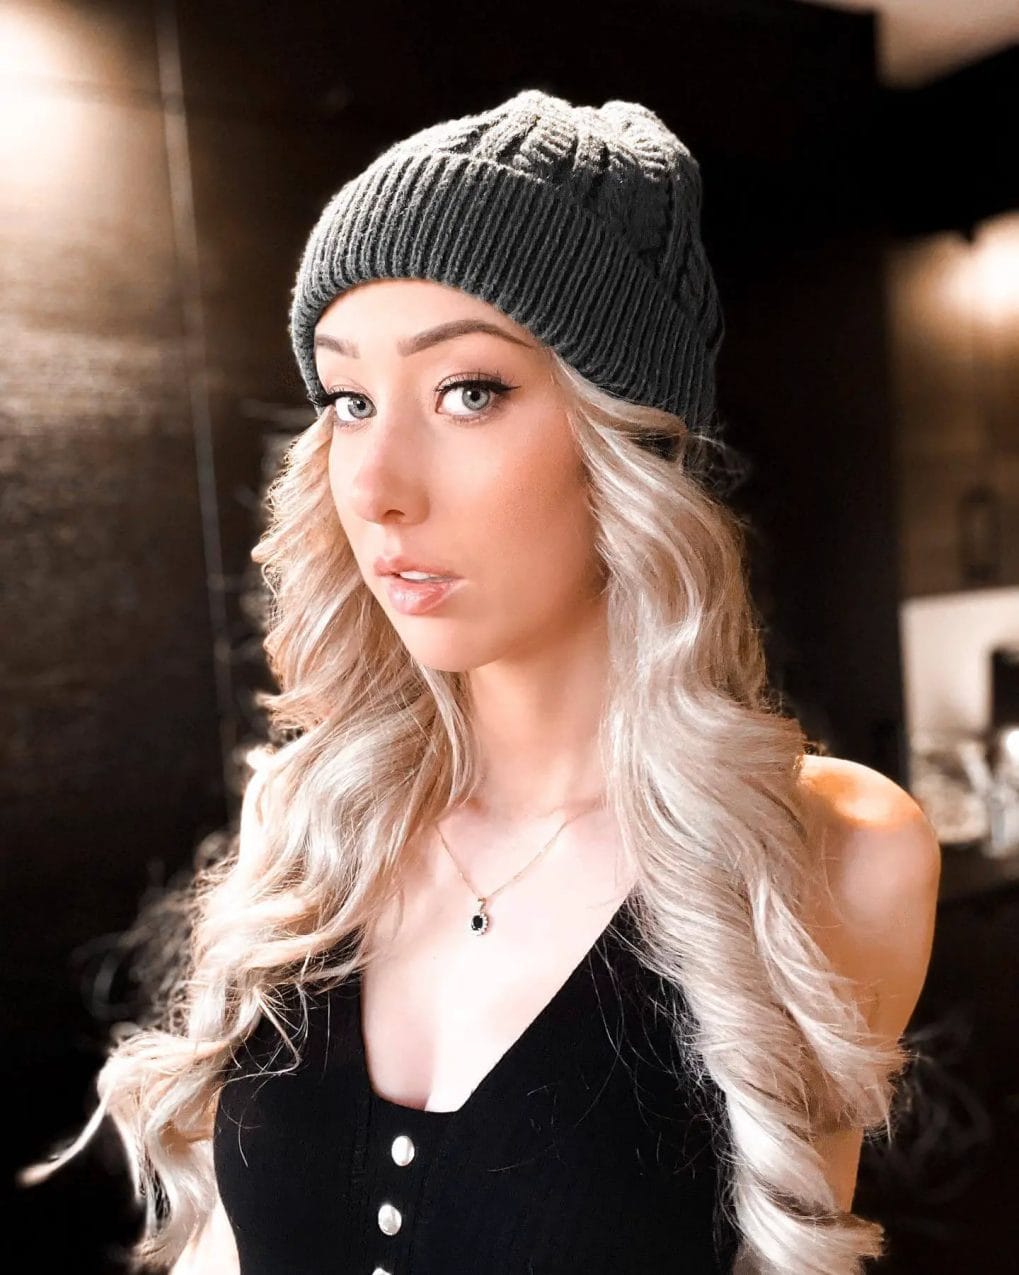 Flowing ash-blonde waves framed by a ribbed charcoal beanie.